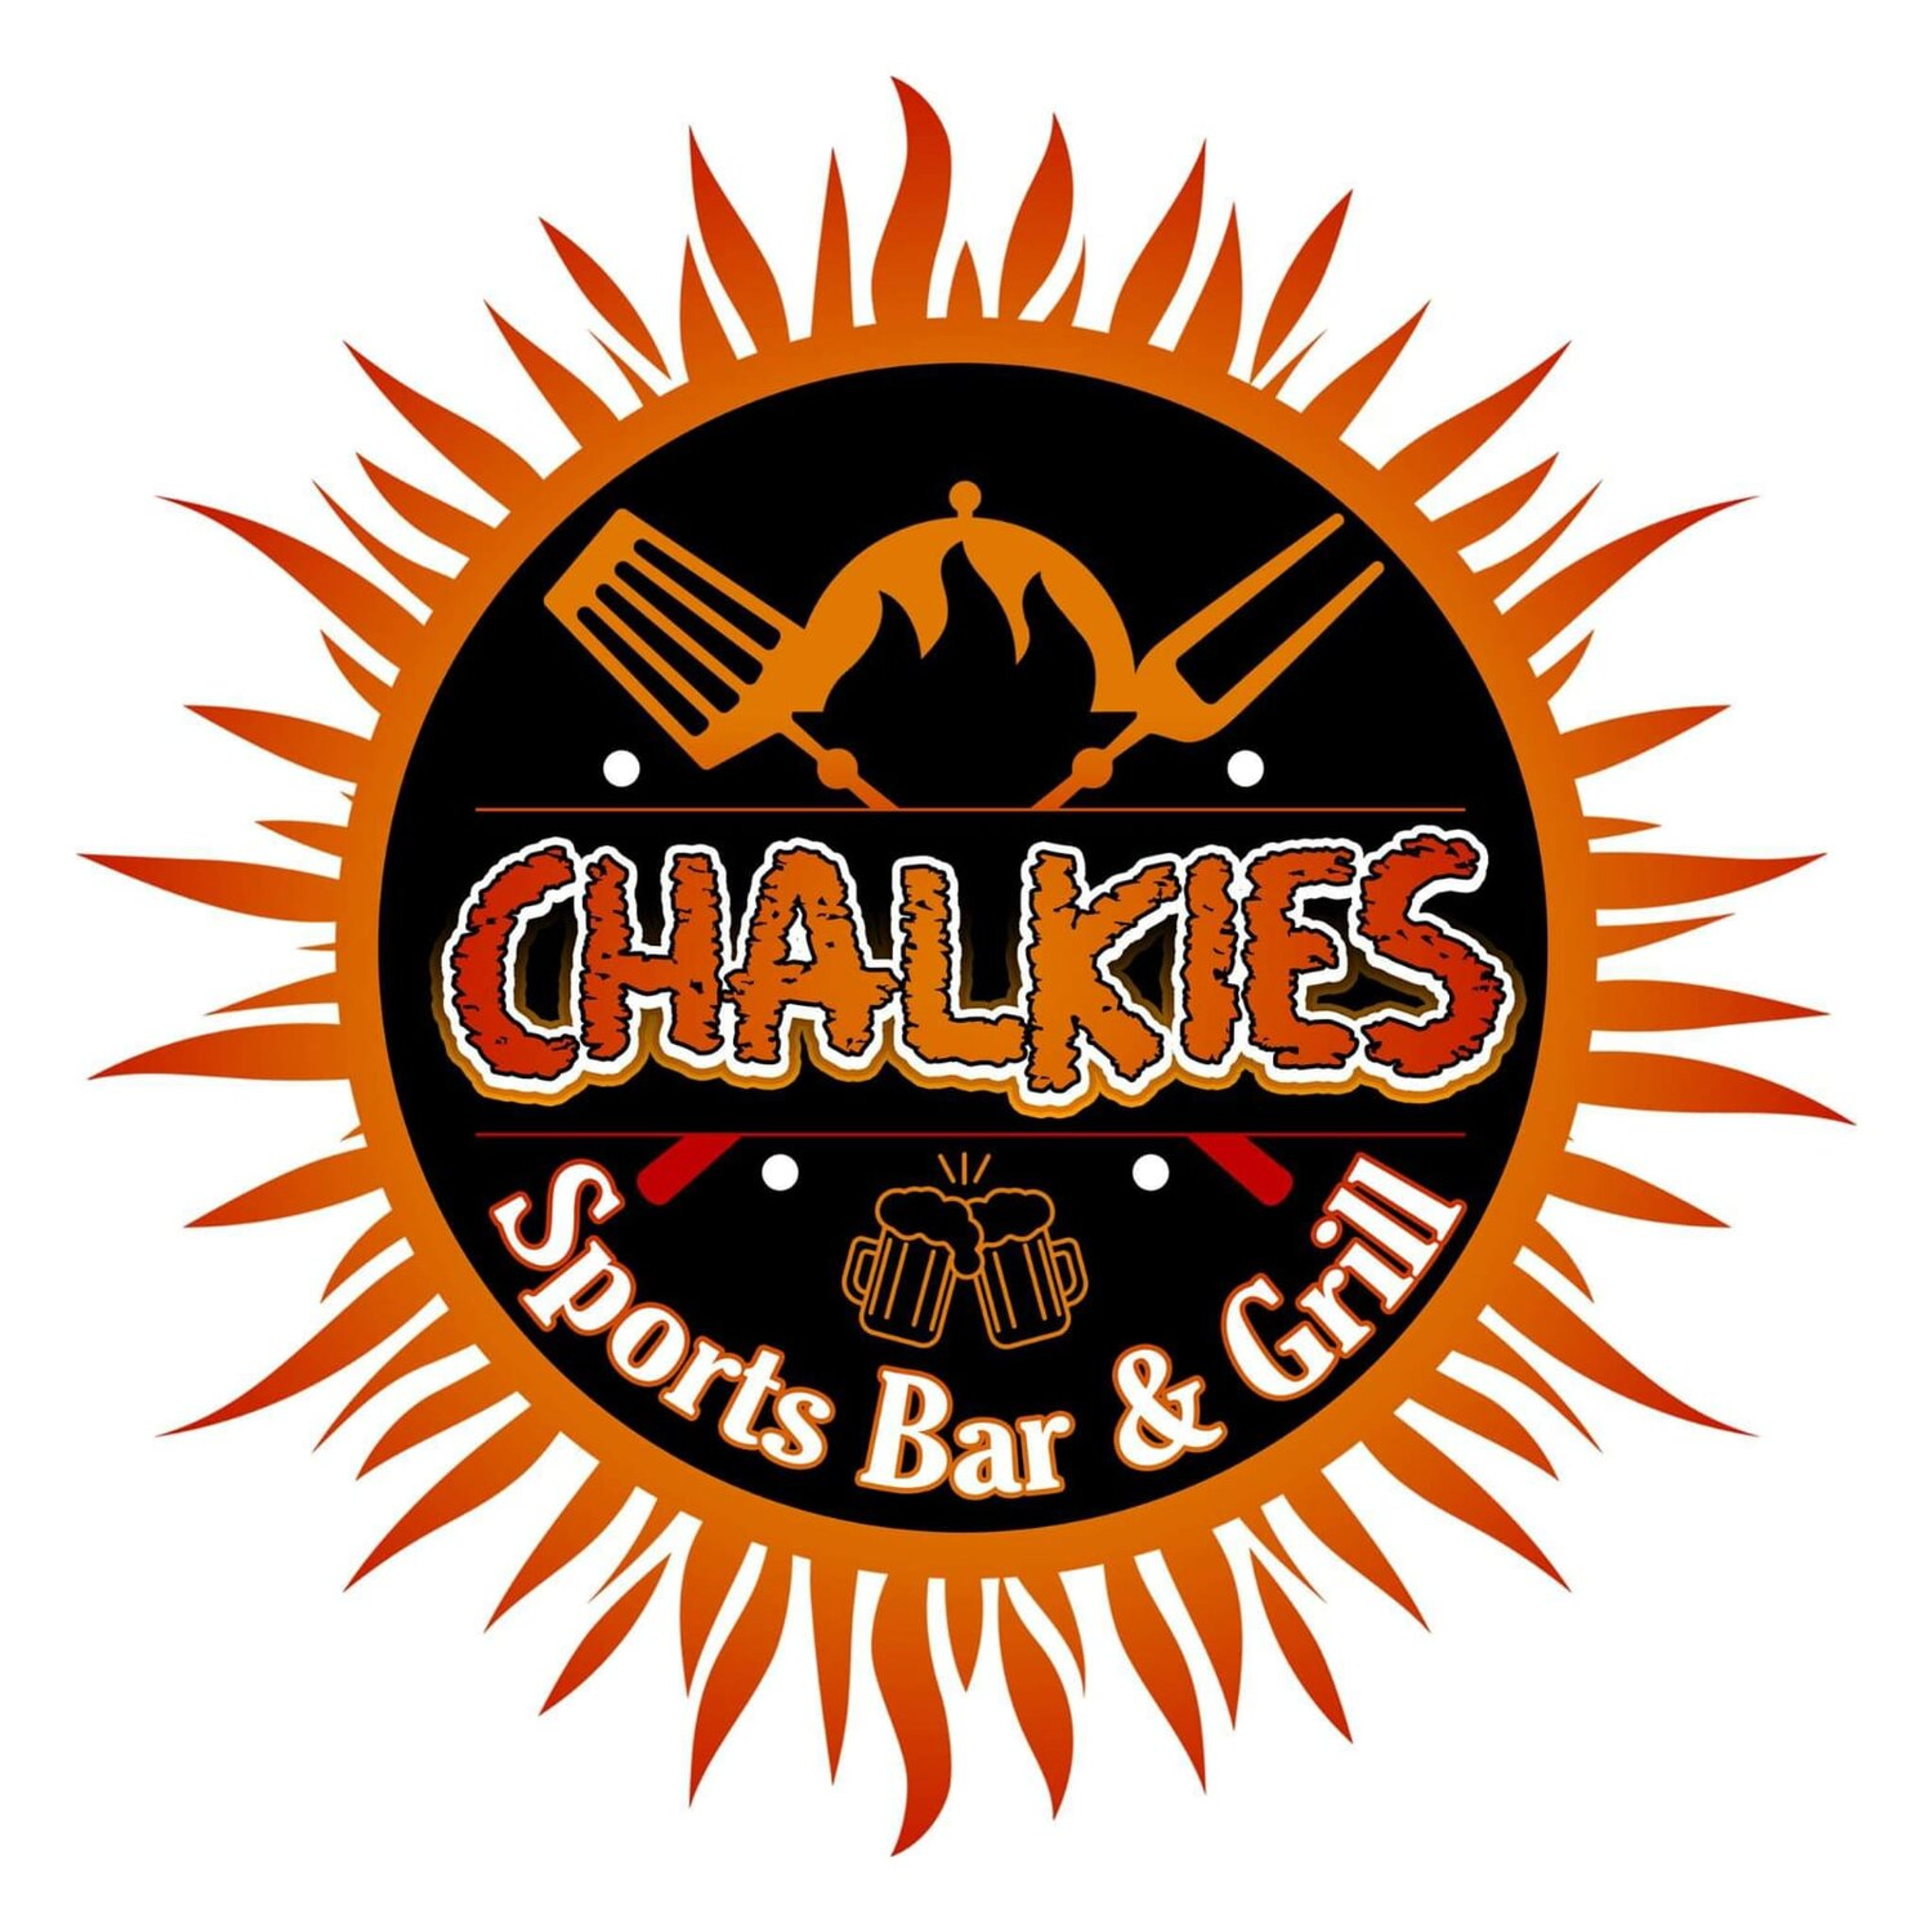 Sports Bar & Lounge in Turks and Caicos Islands  || Chalkies